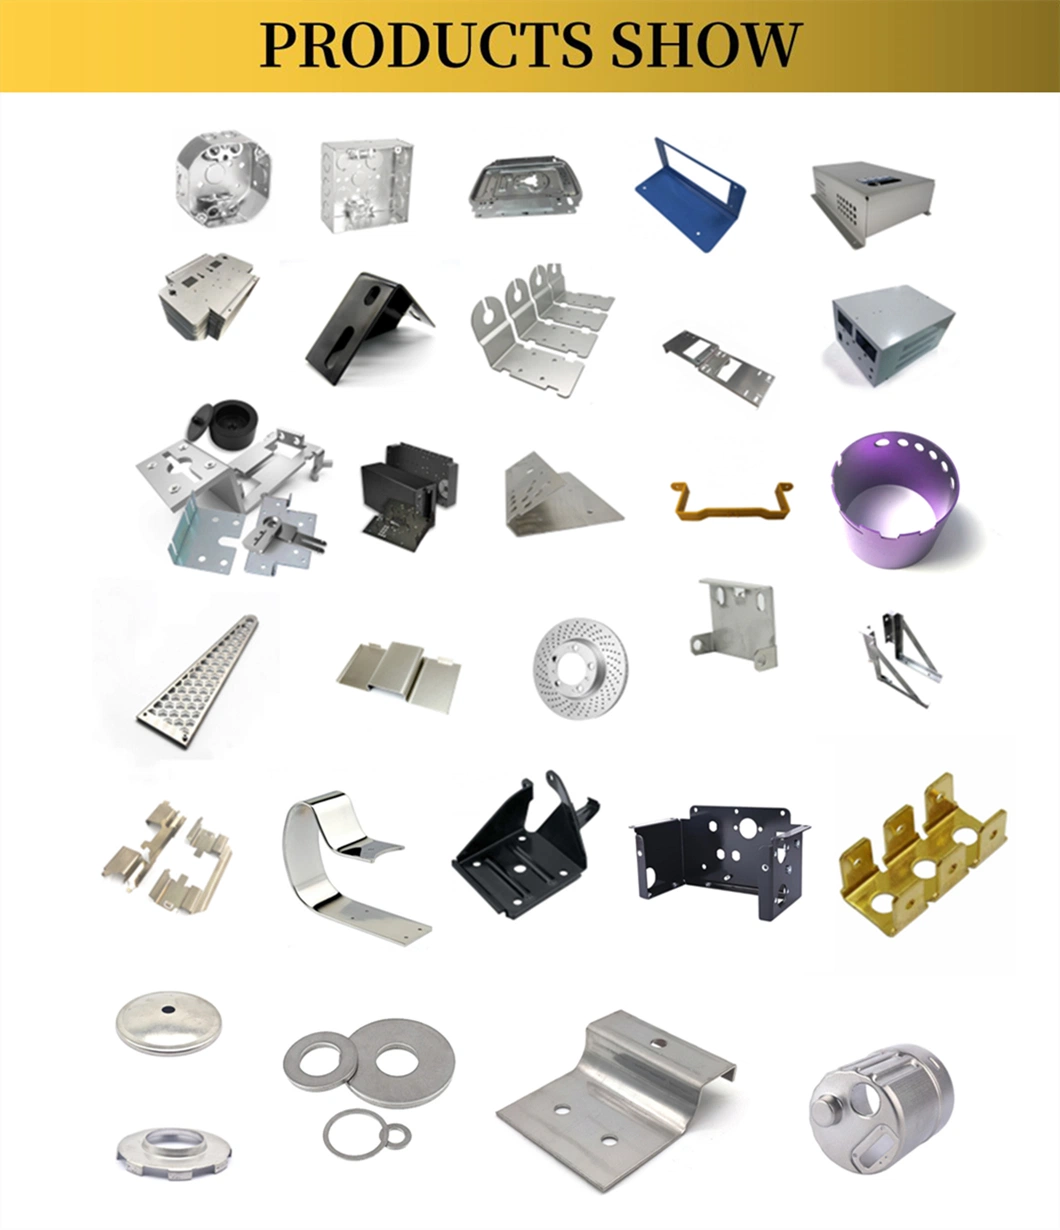 Custom Metal Parts Injection Molding Service with Chapa Metal Laser Cutting Sheet Metal Fabrication